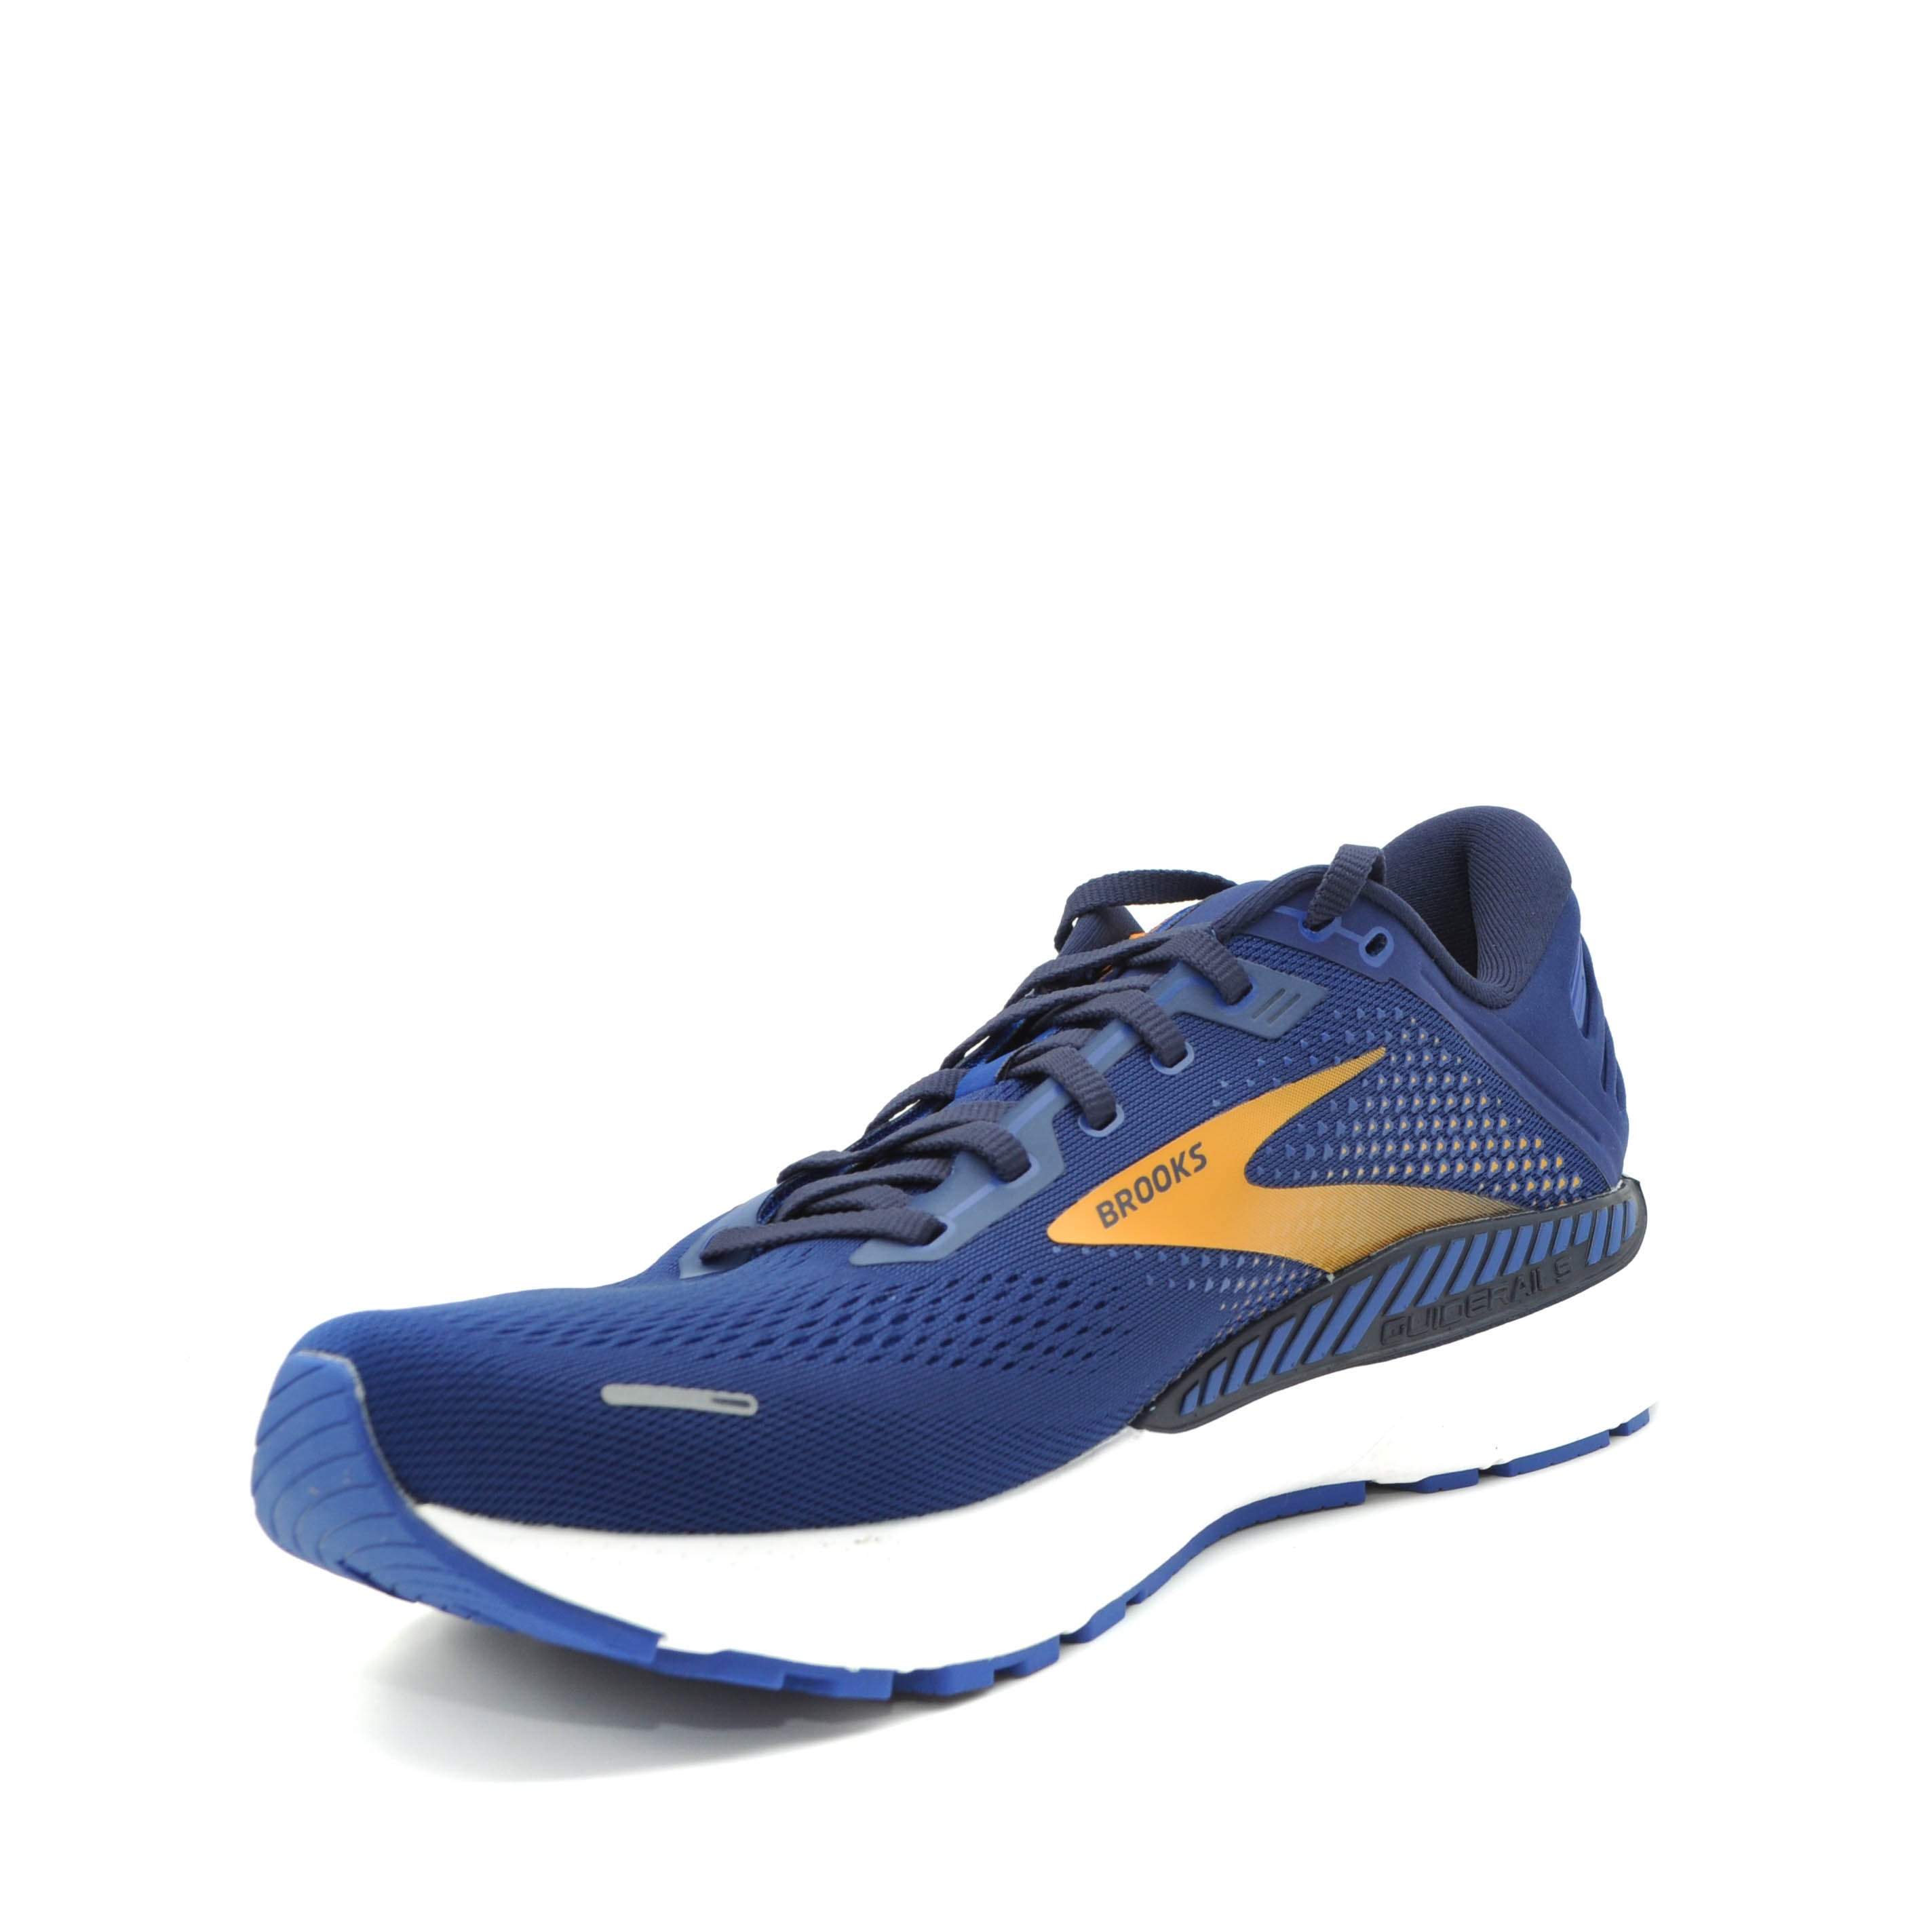 Brooks wide fit runners